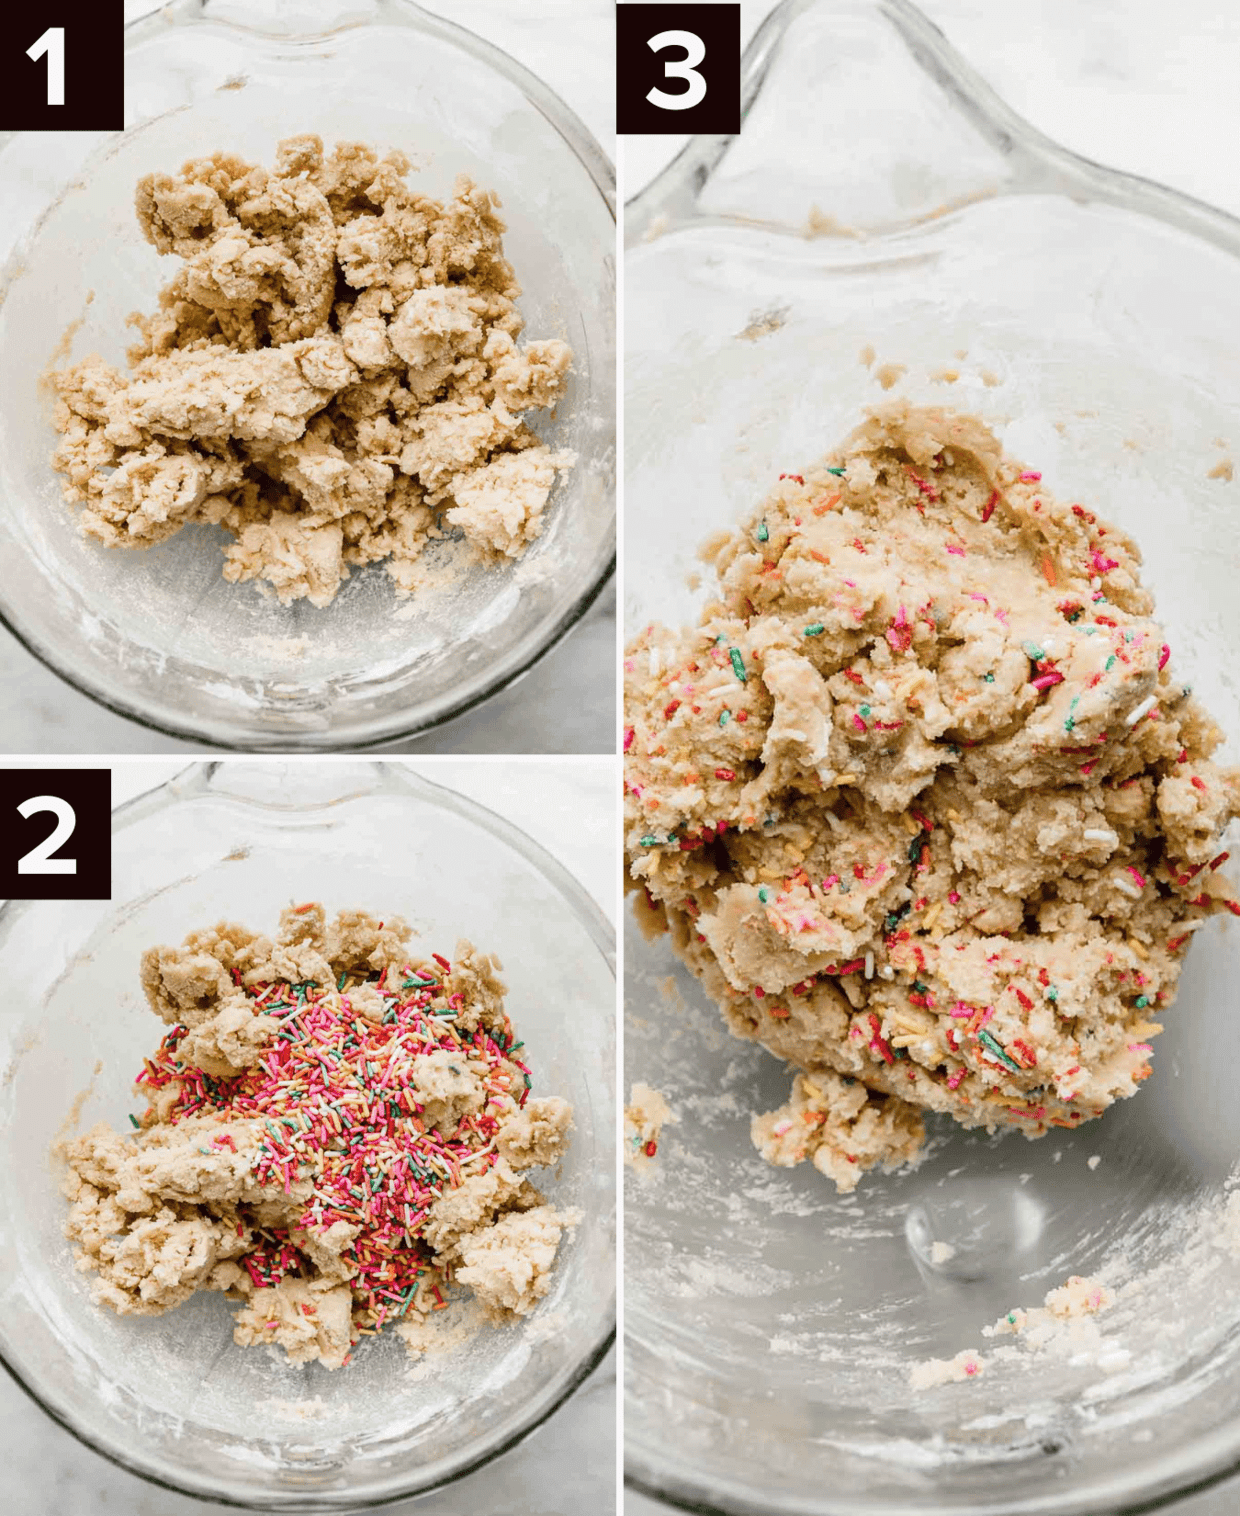 Three photos showing how to make Funfetti Cookie dough, in a glass stand mixer bowl on a white background.